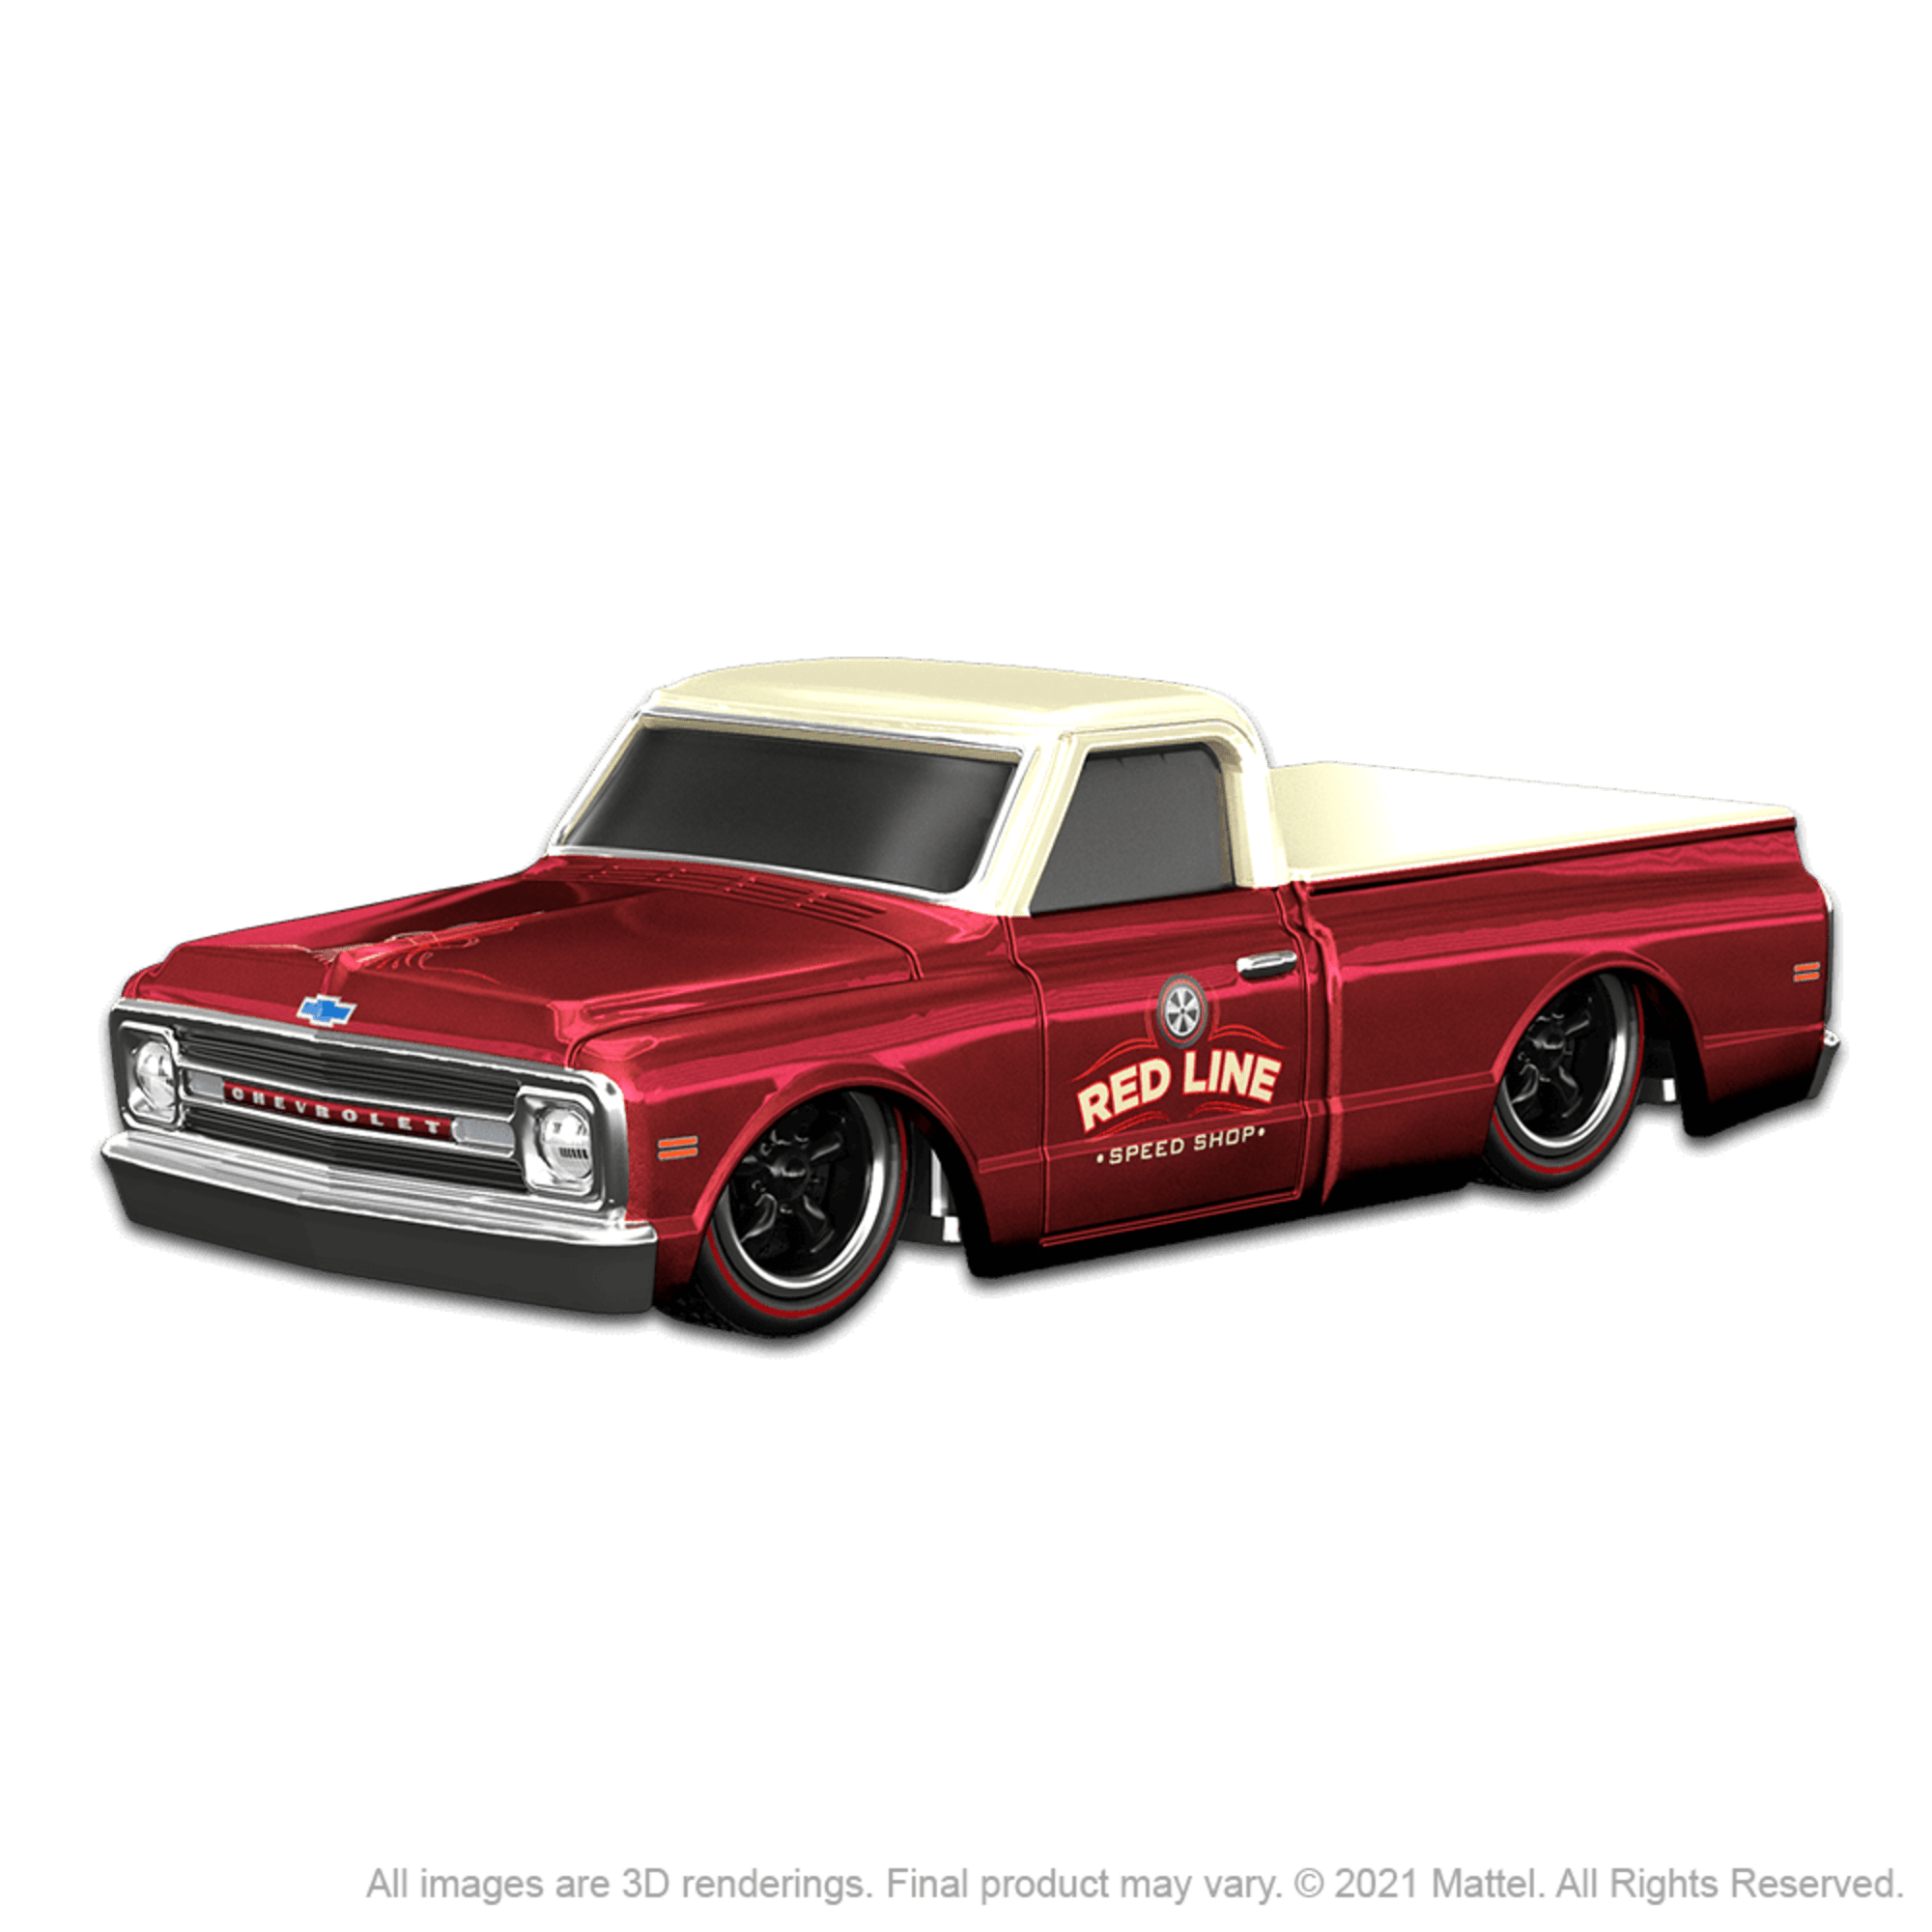 RLC sELECTIONs 1969 Chevy® C-10